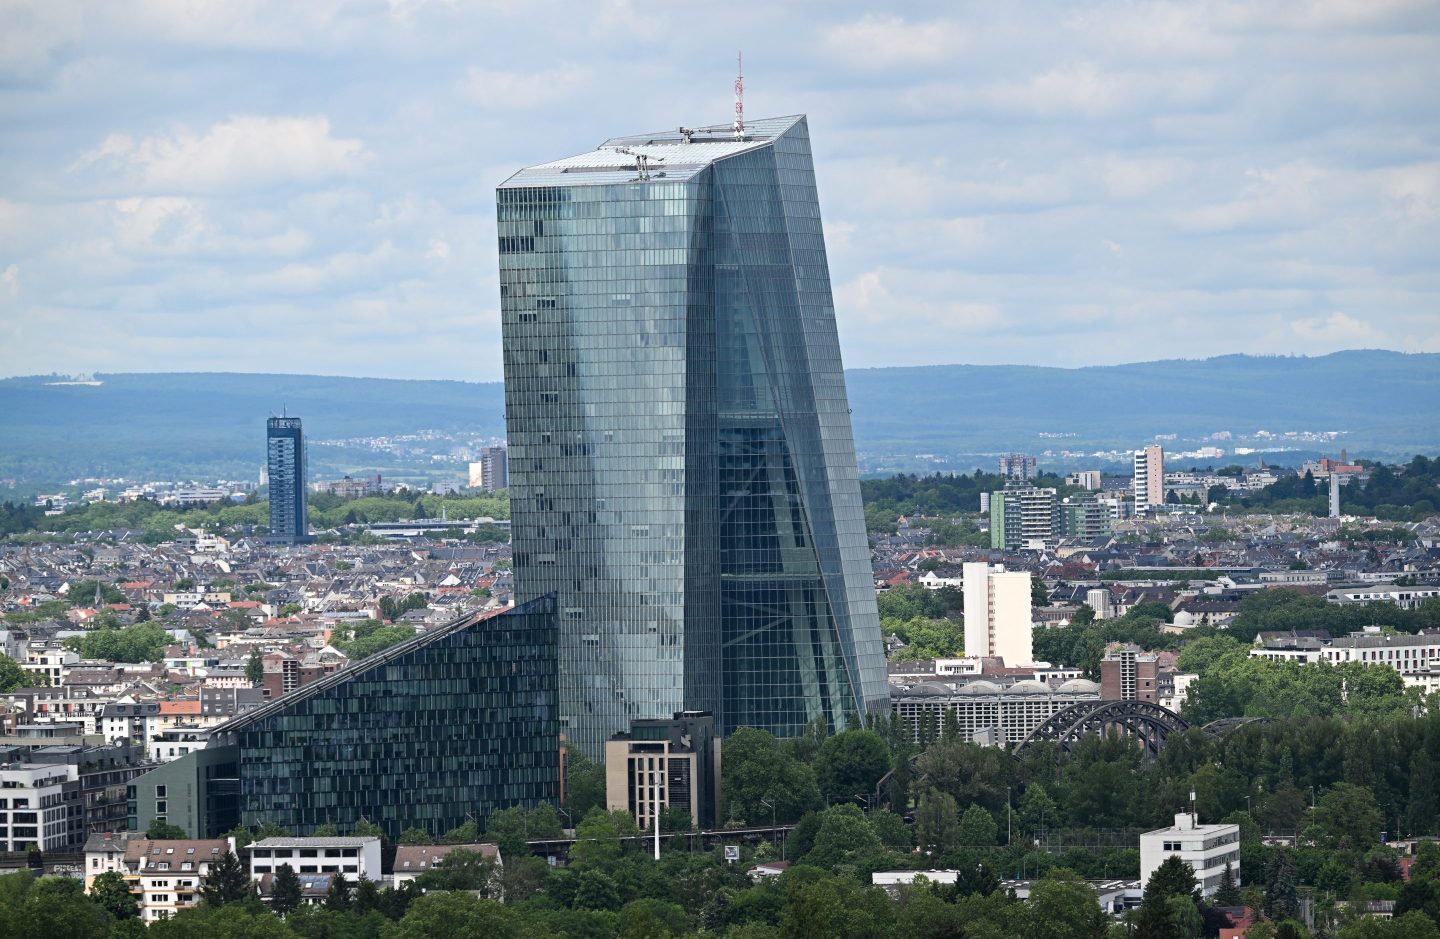 The headquarters of the European Central Bank (ECB) in Frankfurt's Ostend district.